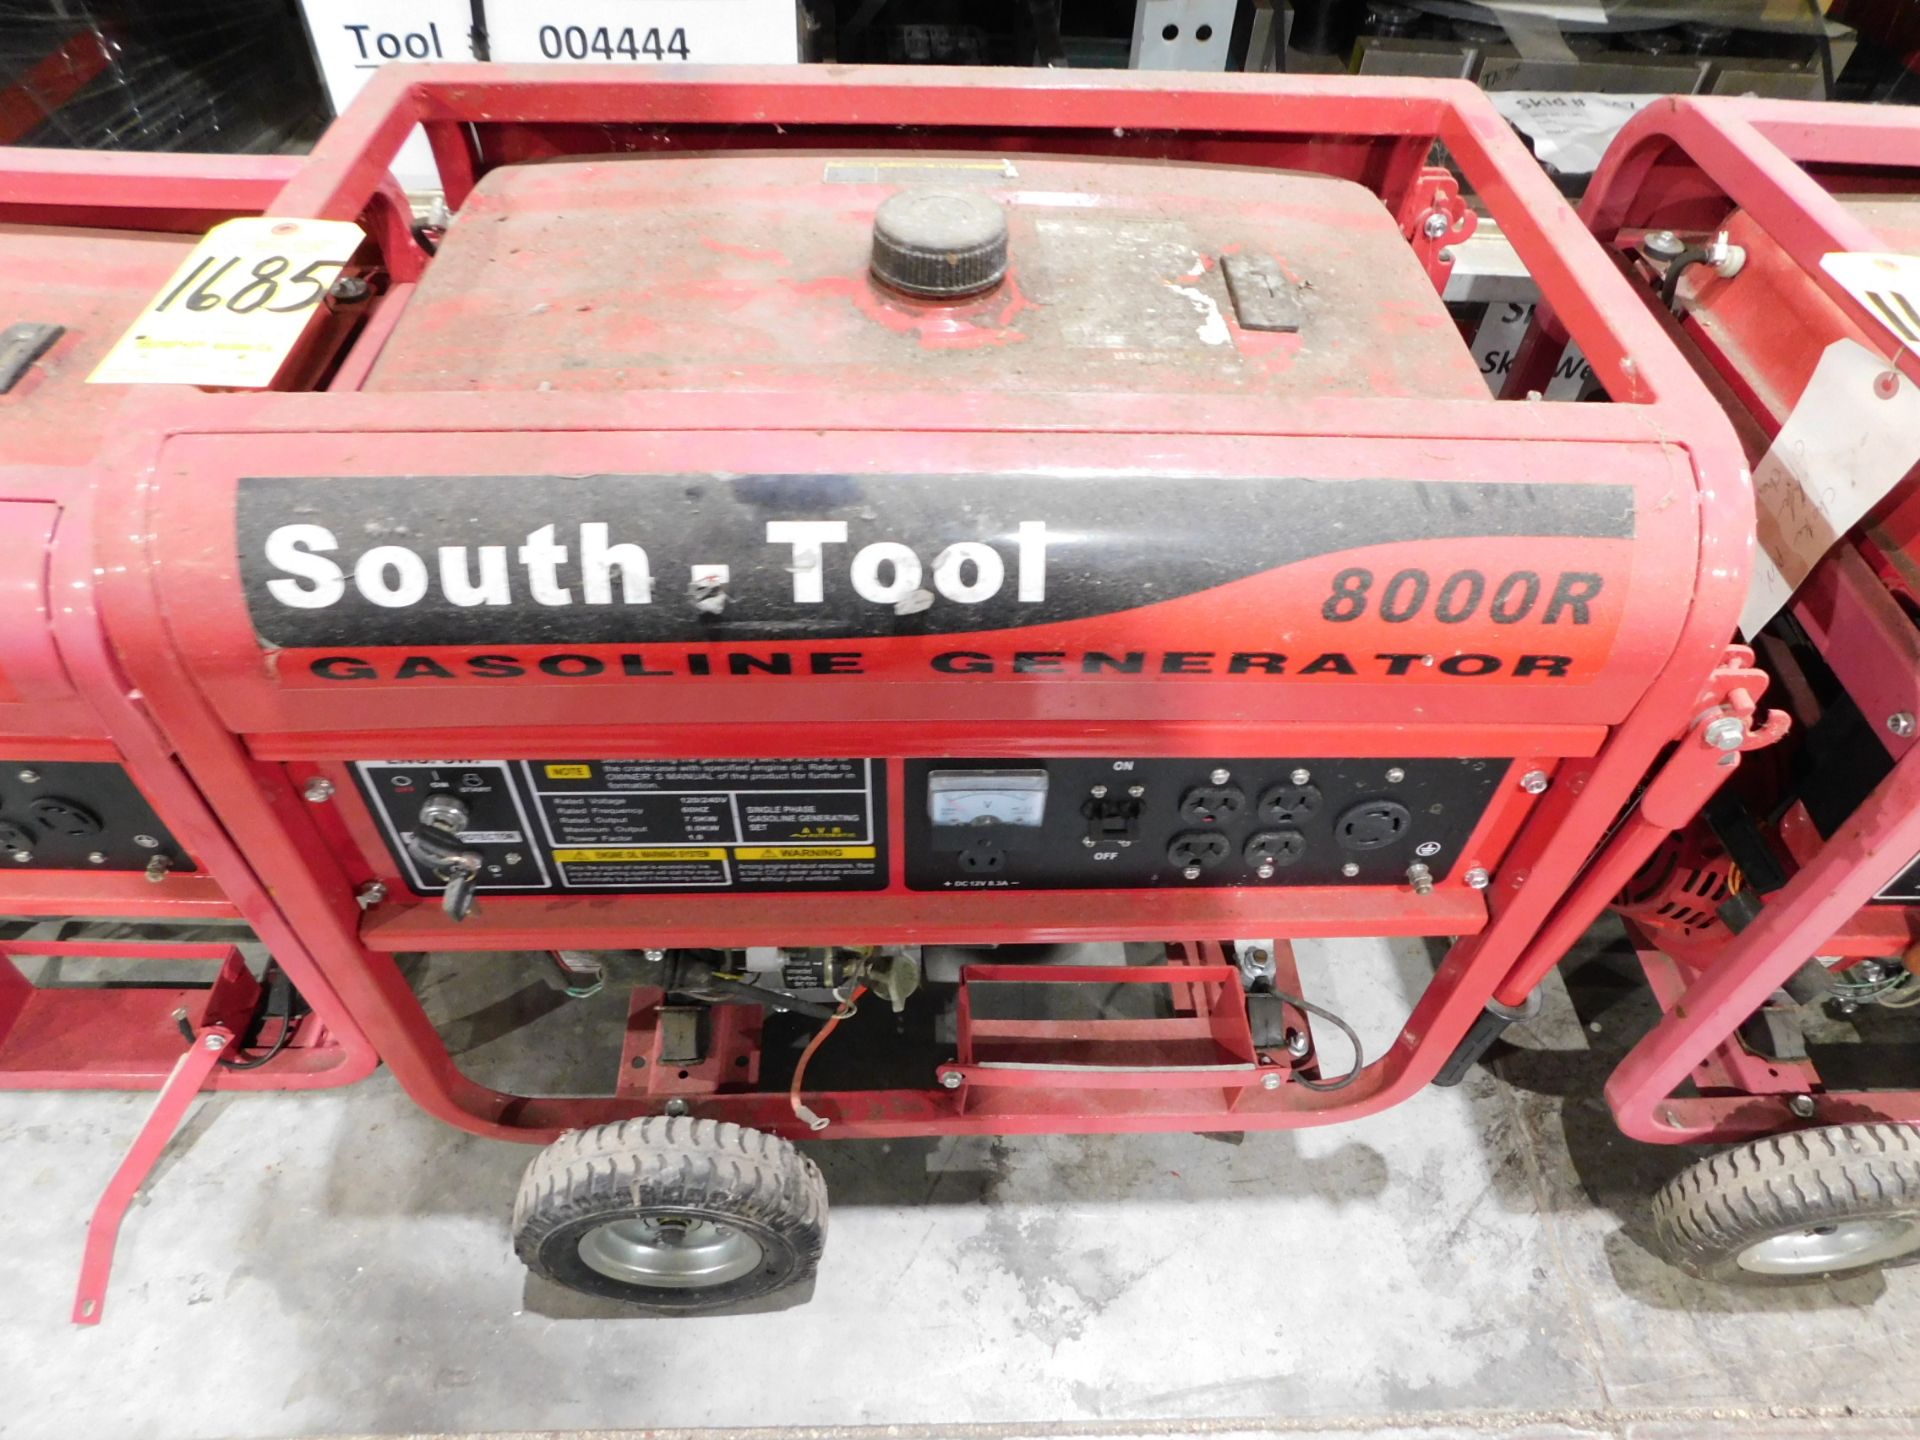 South Tool Model 80002R Gas Powered Generator, 8000 Max Watts 15H.P. Condition Unknown